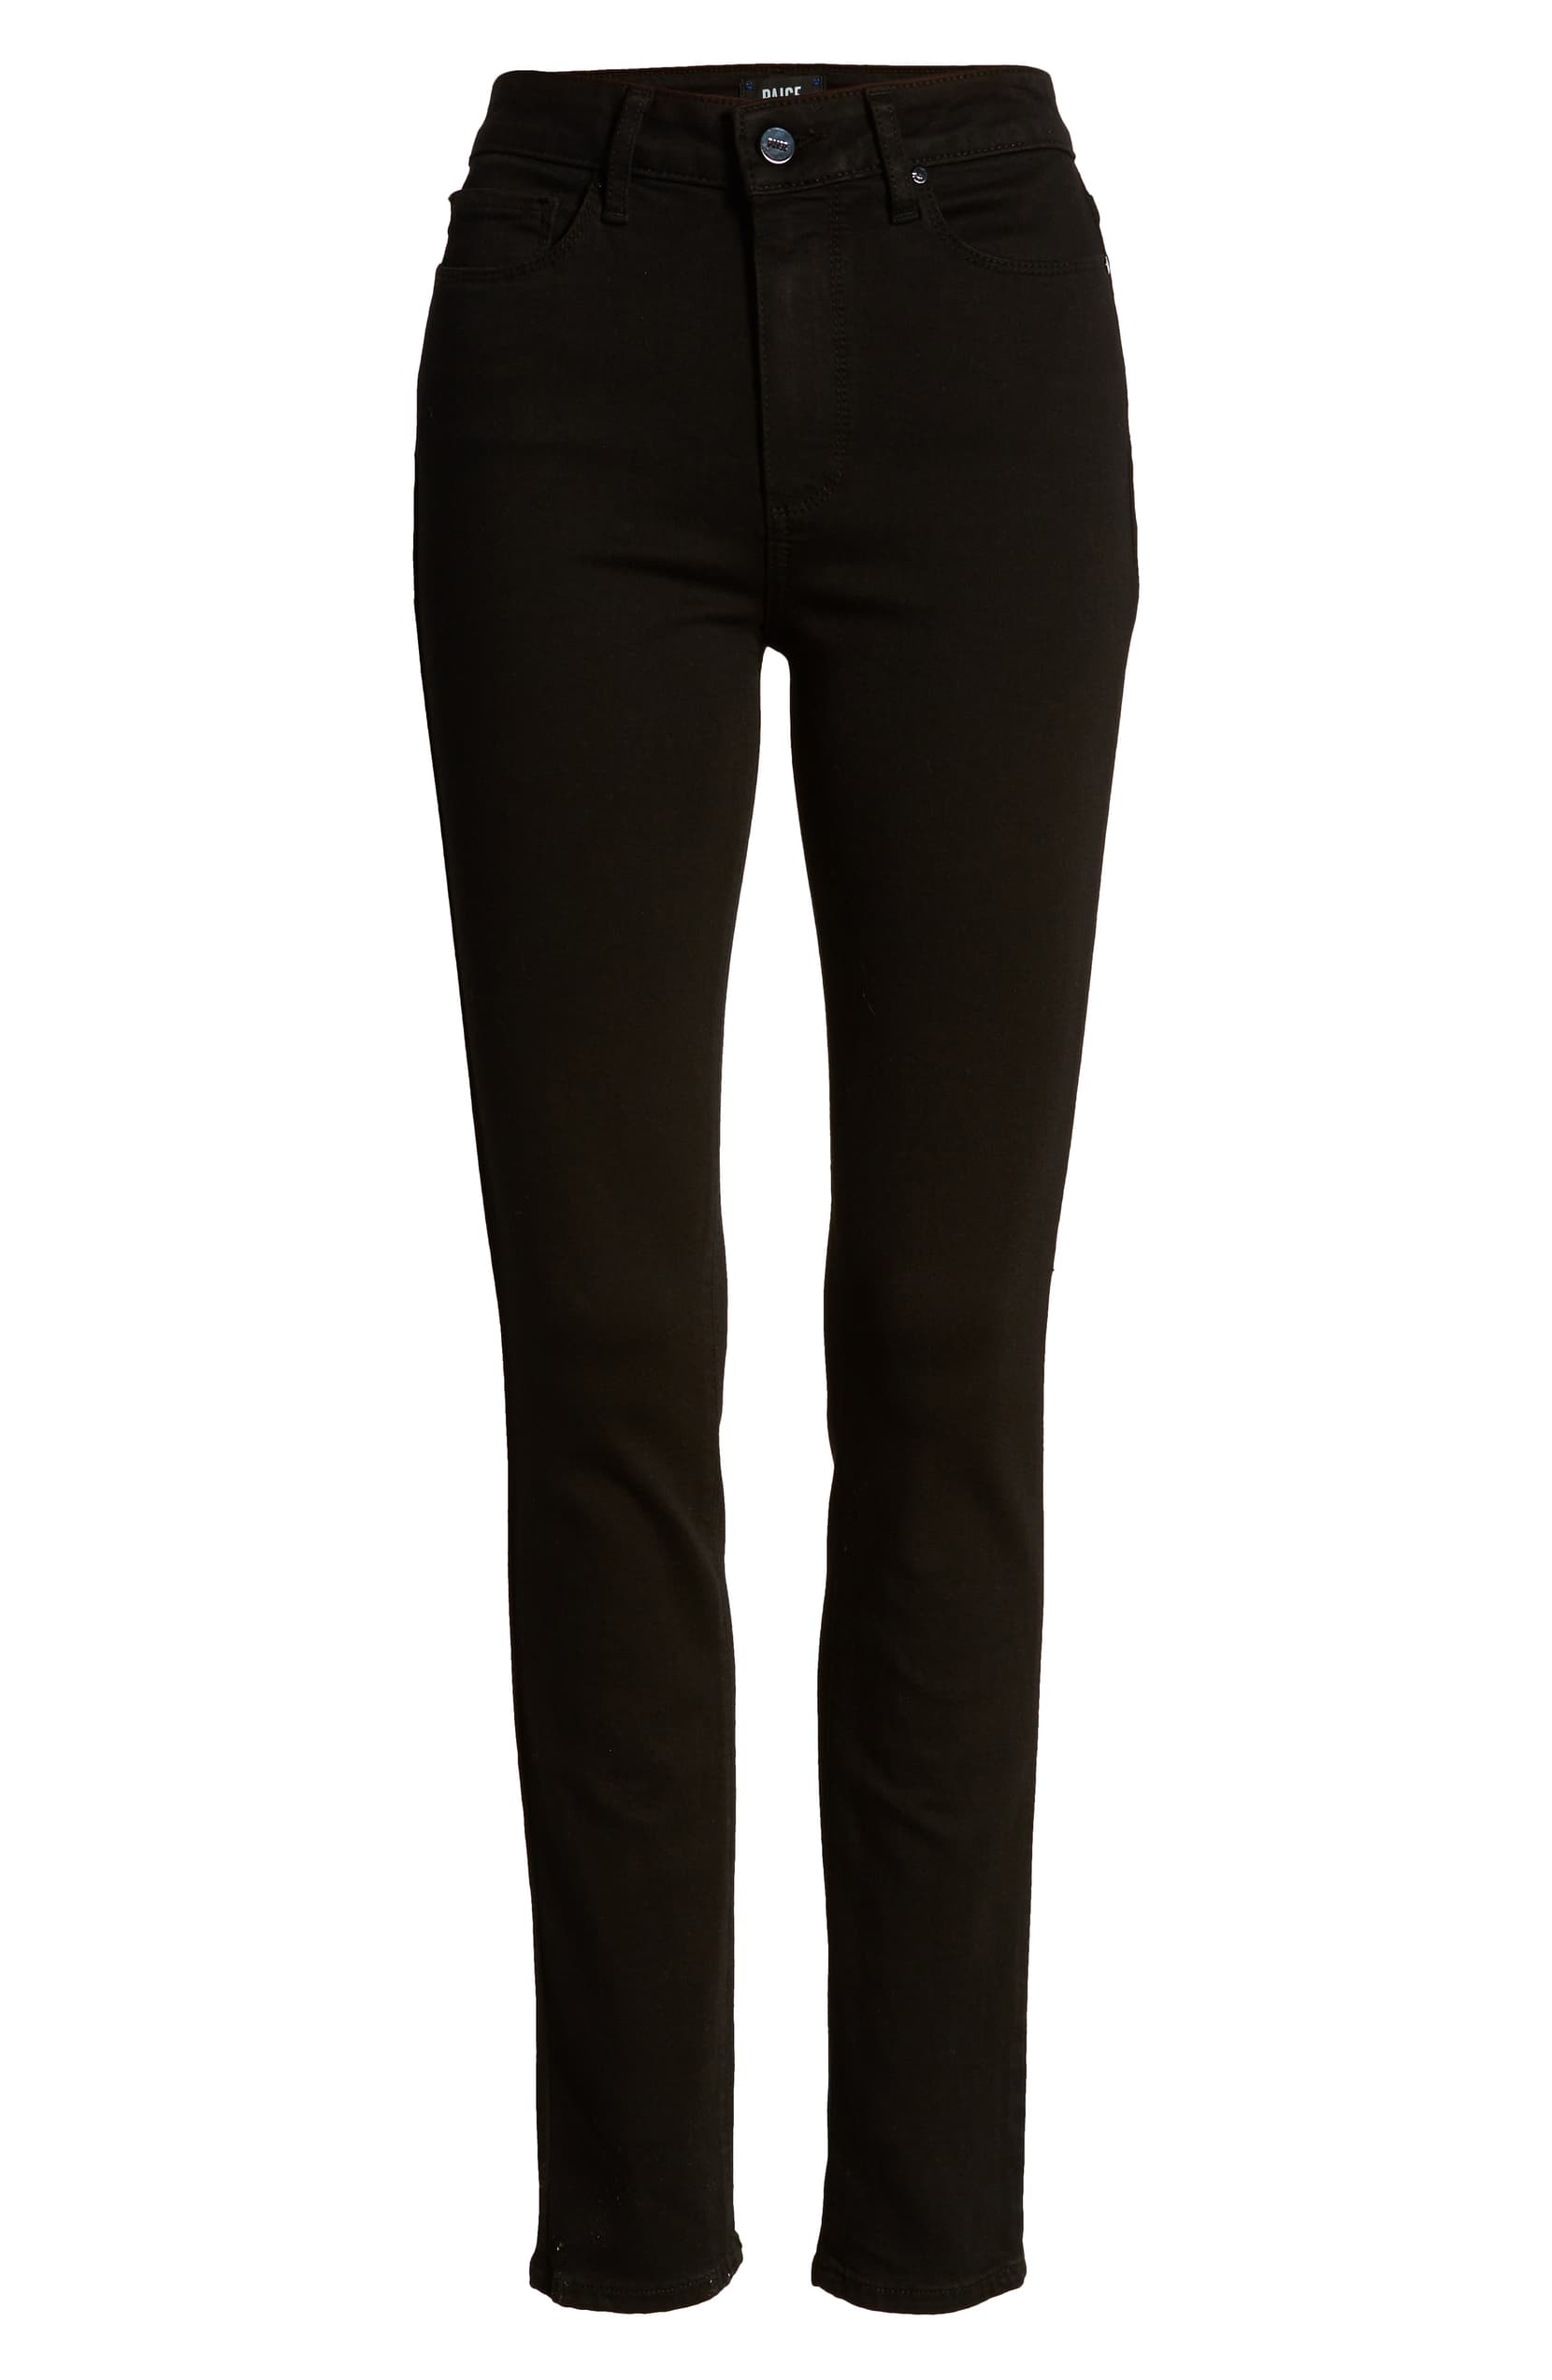 The Best High-Waisted Black Jeans With Amazing Reviews | Who What Wear